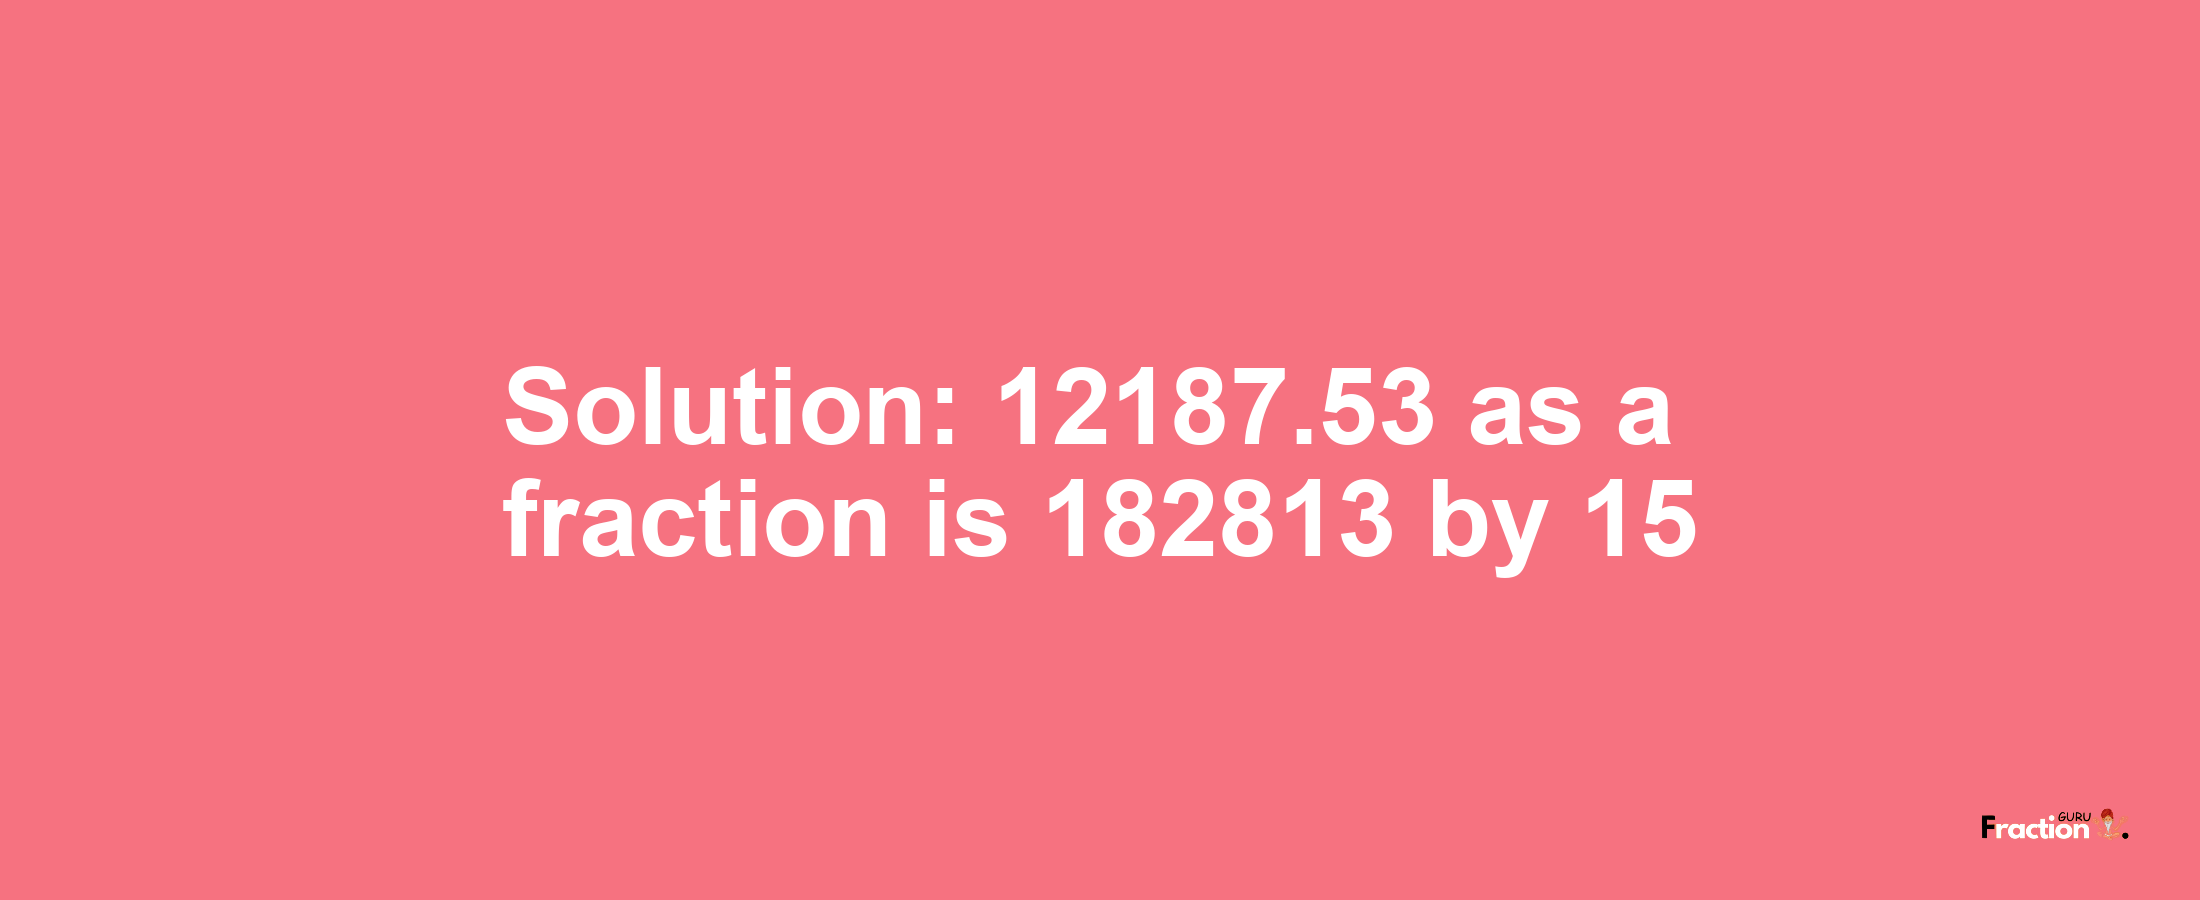 Solution:12187.53 as a fraction is 182813/15